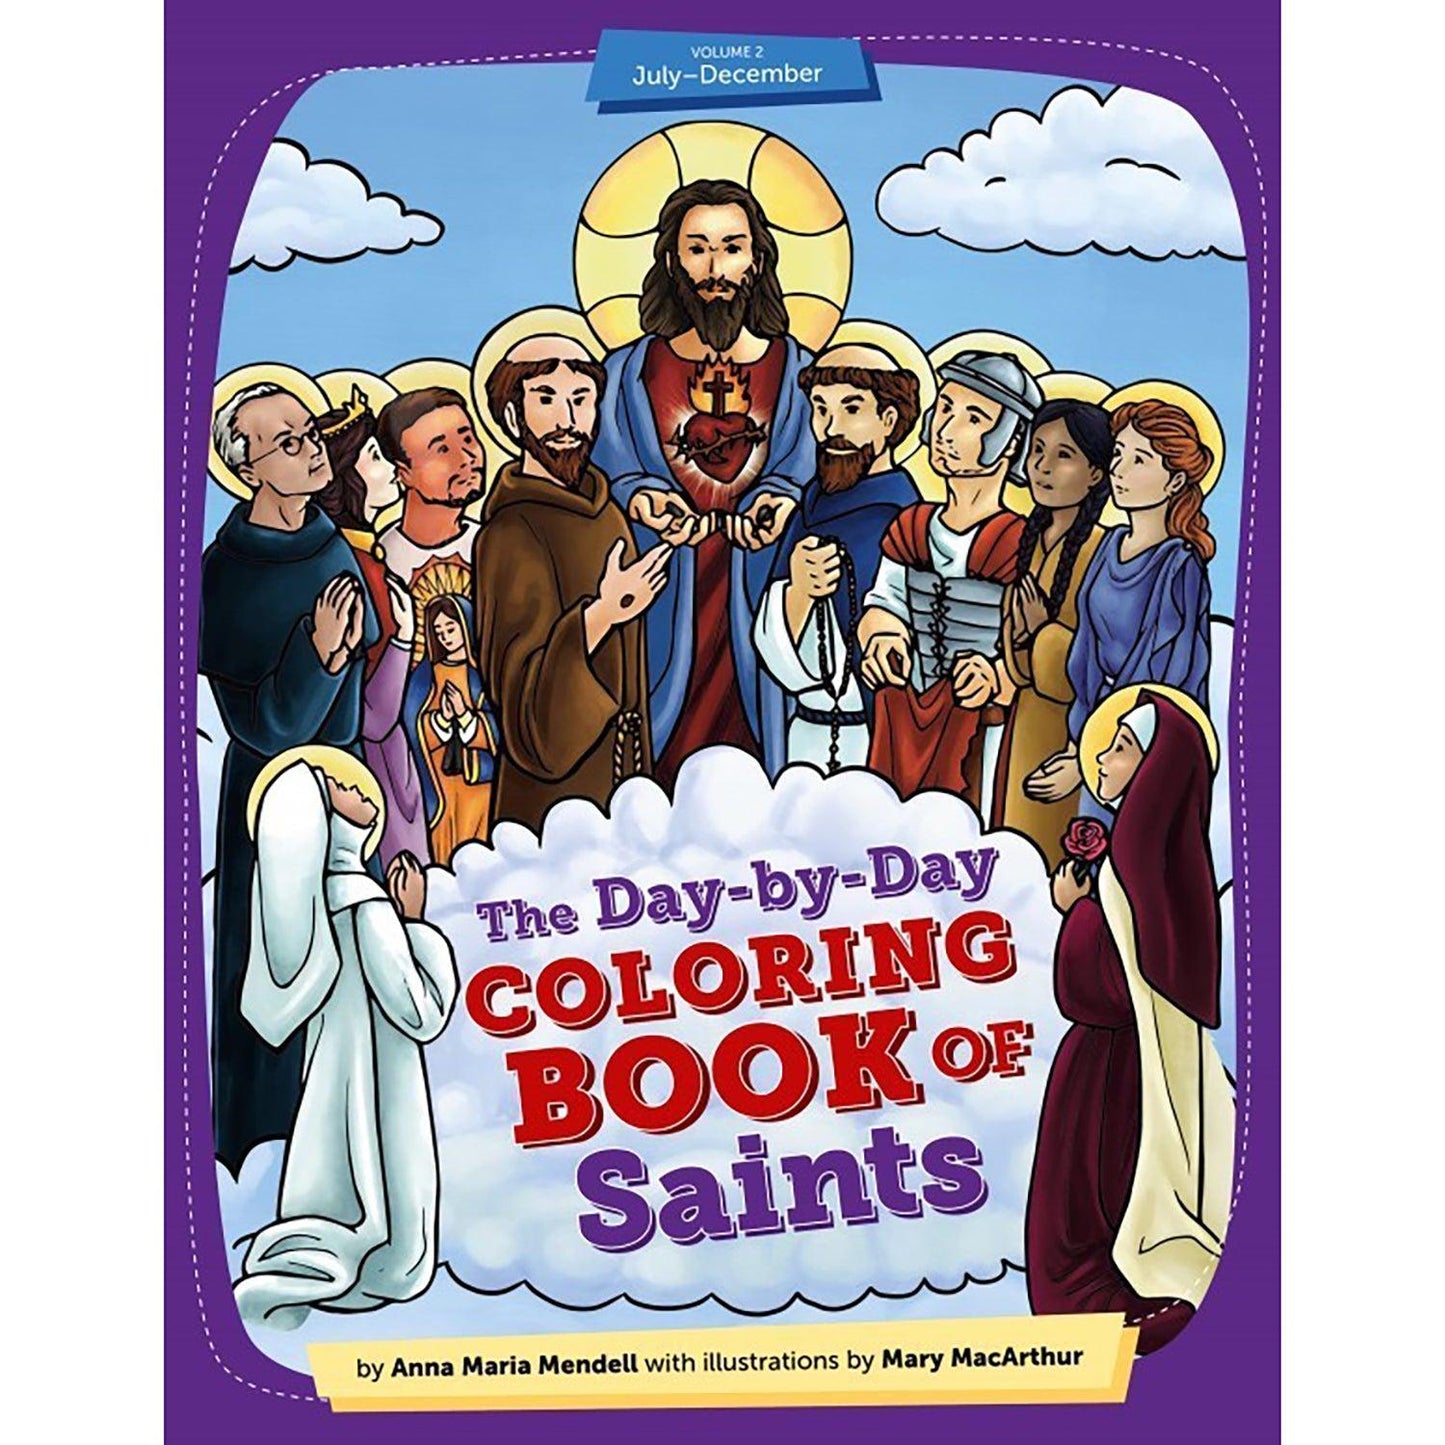 Day-by-Day Coloring Book of Saints Volume 2 - Loomini